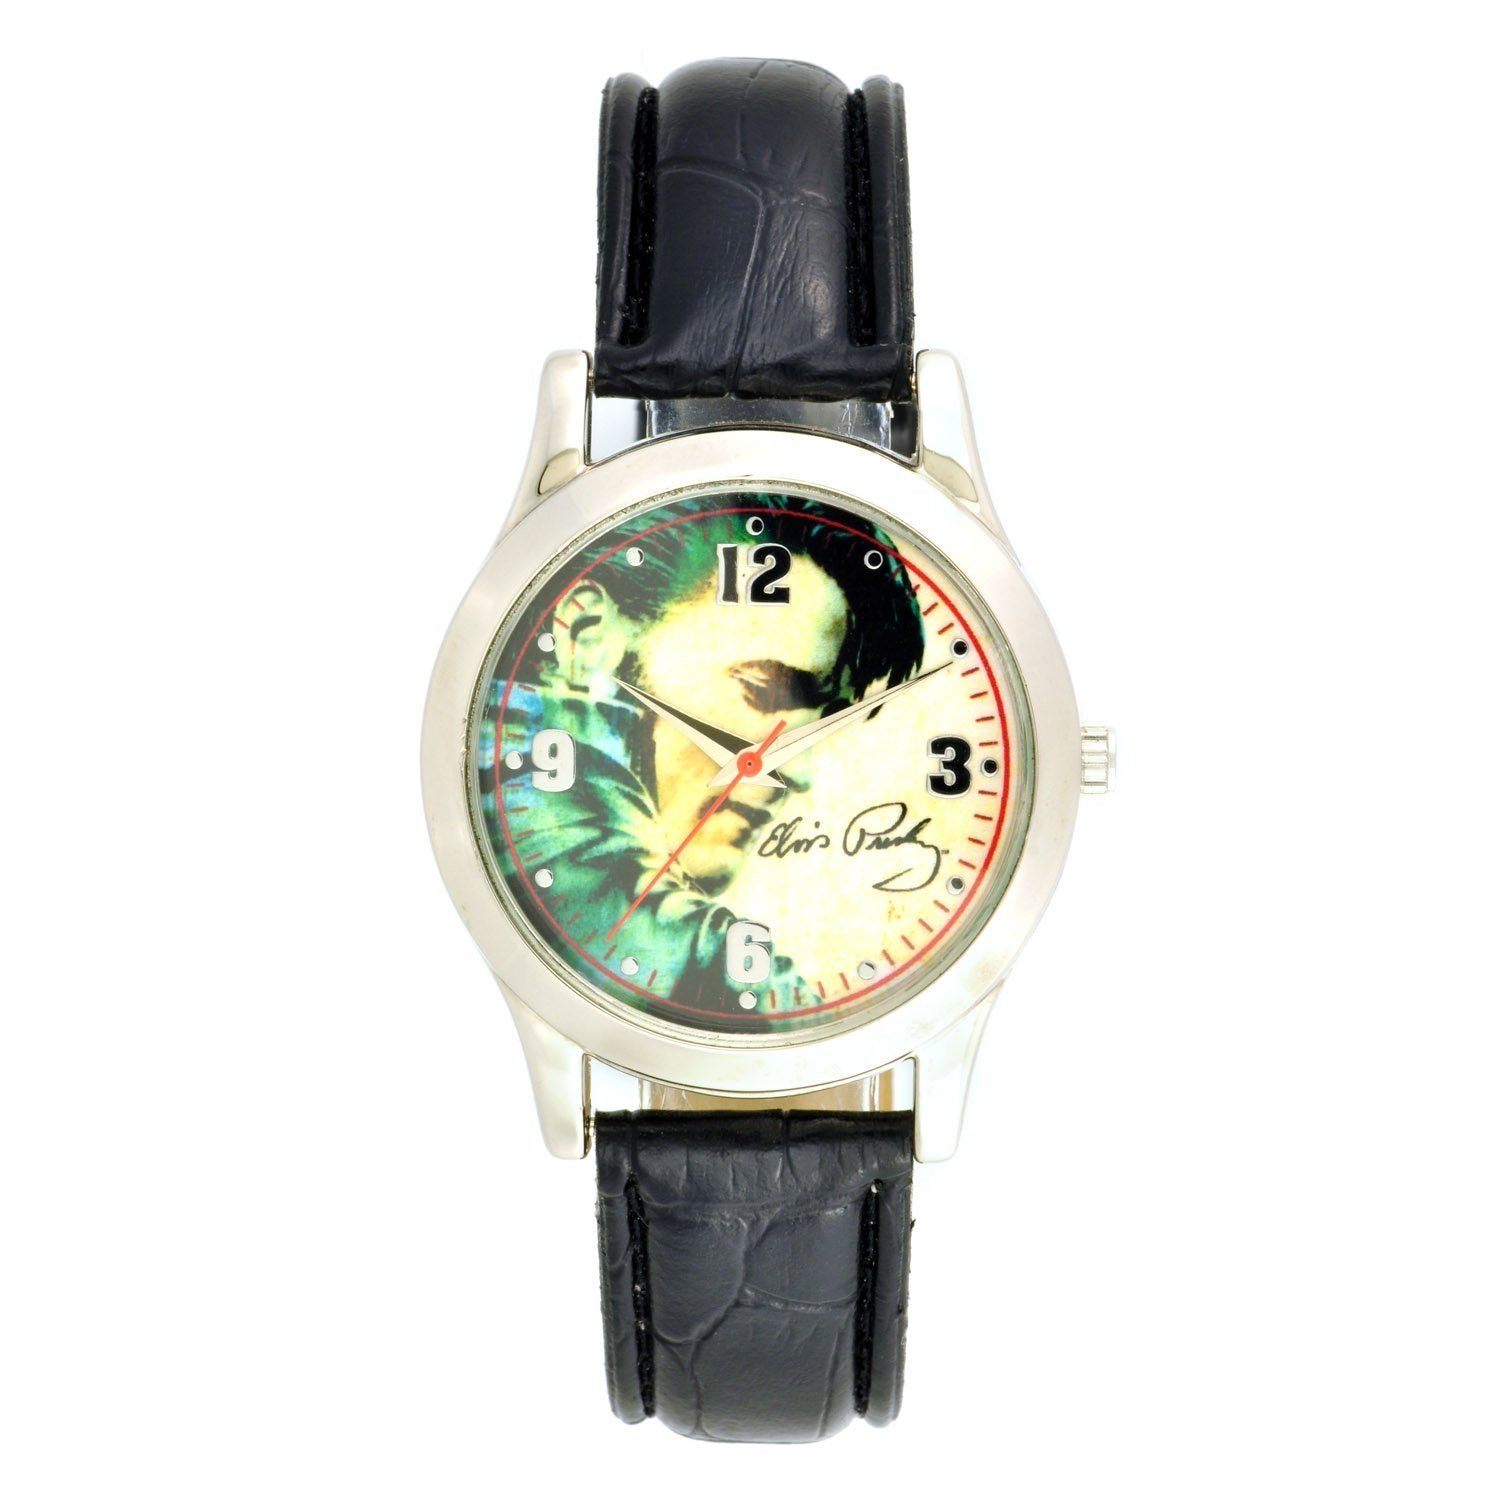 Model: Men's Elvis Presley Watch with Round Silver Tone Case and Black Strap